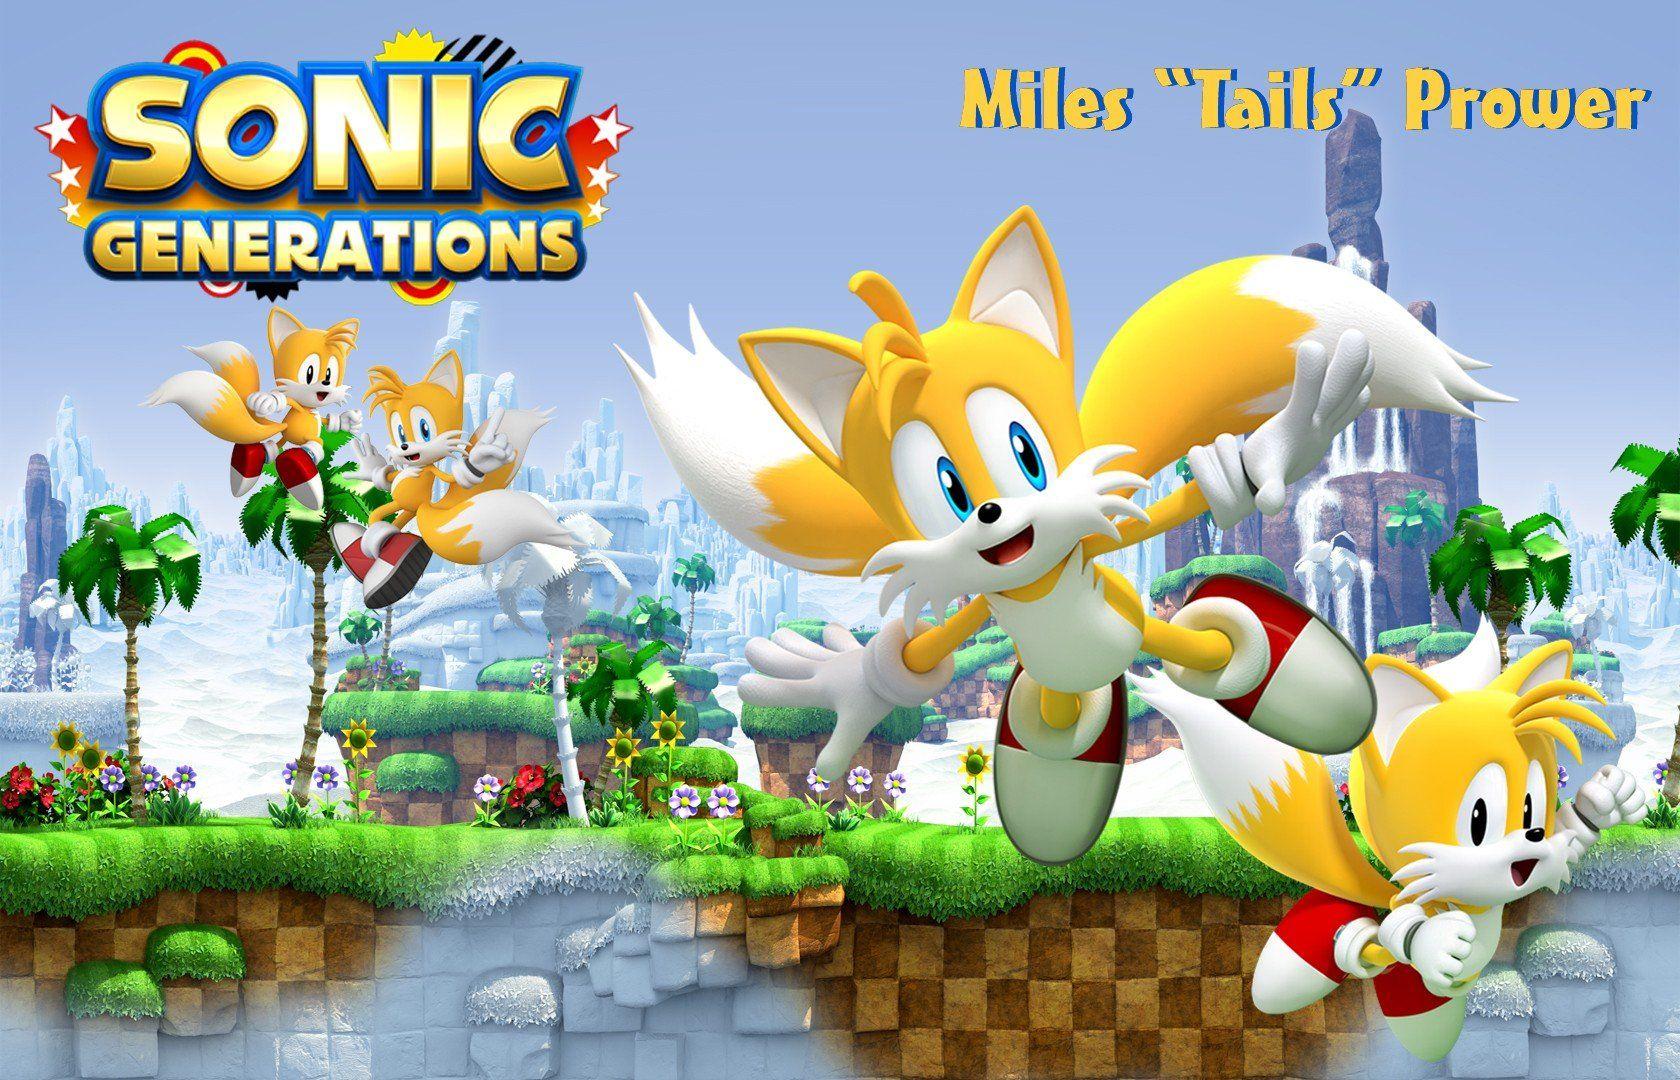 tails character sonic sonic the hedgehog sonic generations wallpaper